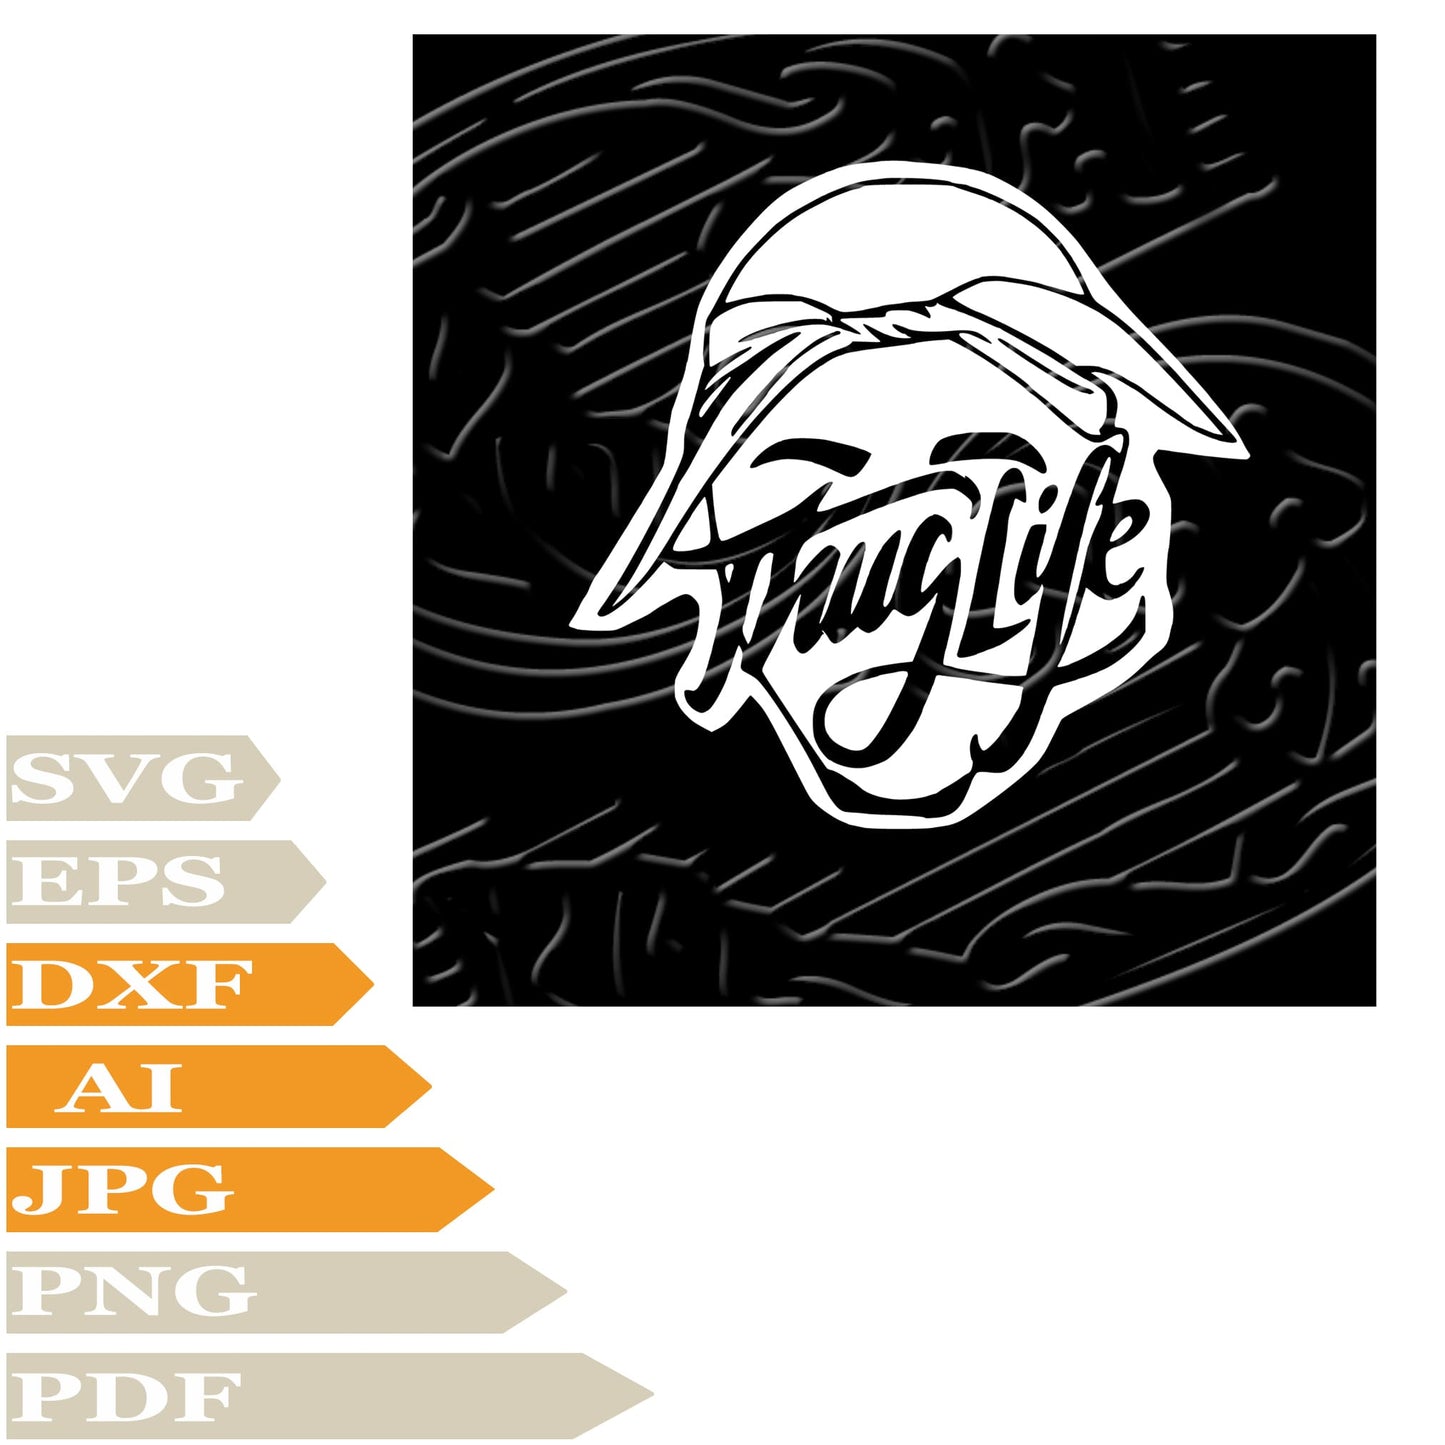 Tupac Shakur, 2Pac Thug Life Svg File, Image Cut, Png, For Tattoo, Silhouette, Digital Vector Download, Cut File, Clipart, For Cricut